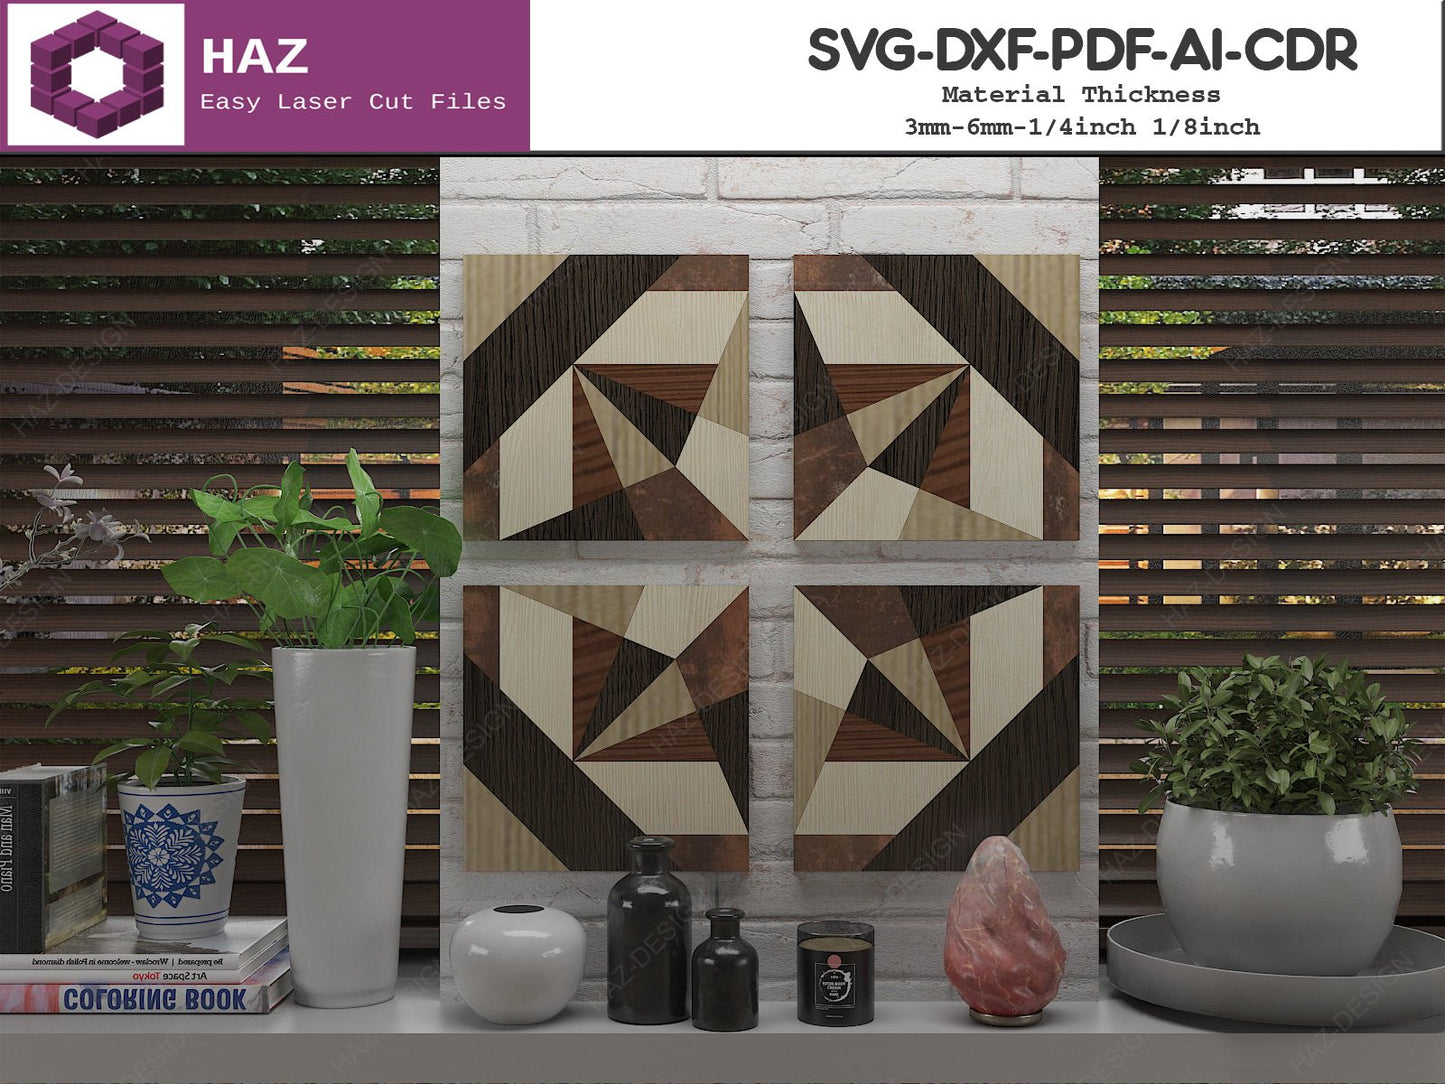 Wooden Wall Art Pattern / Barn Quilt Laser Files / Quilts Block Wall Decor / Wood Quilt Cuts / Geometric Design SVG DXF Ai CDR 077